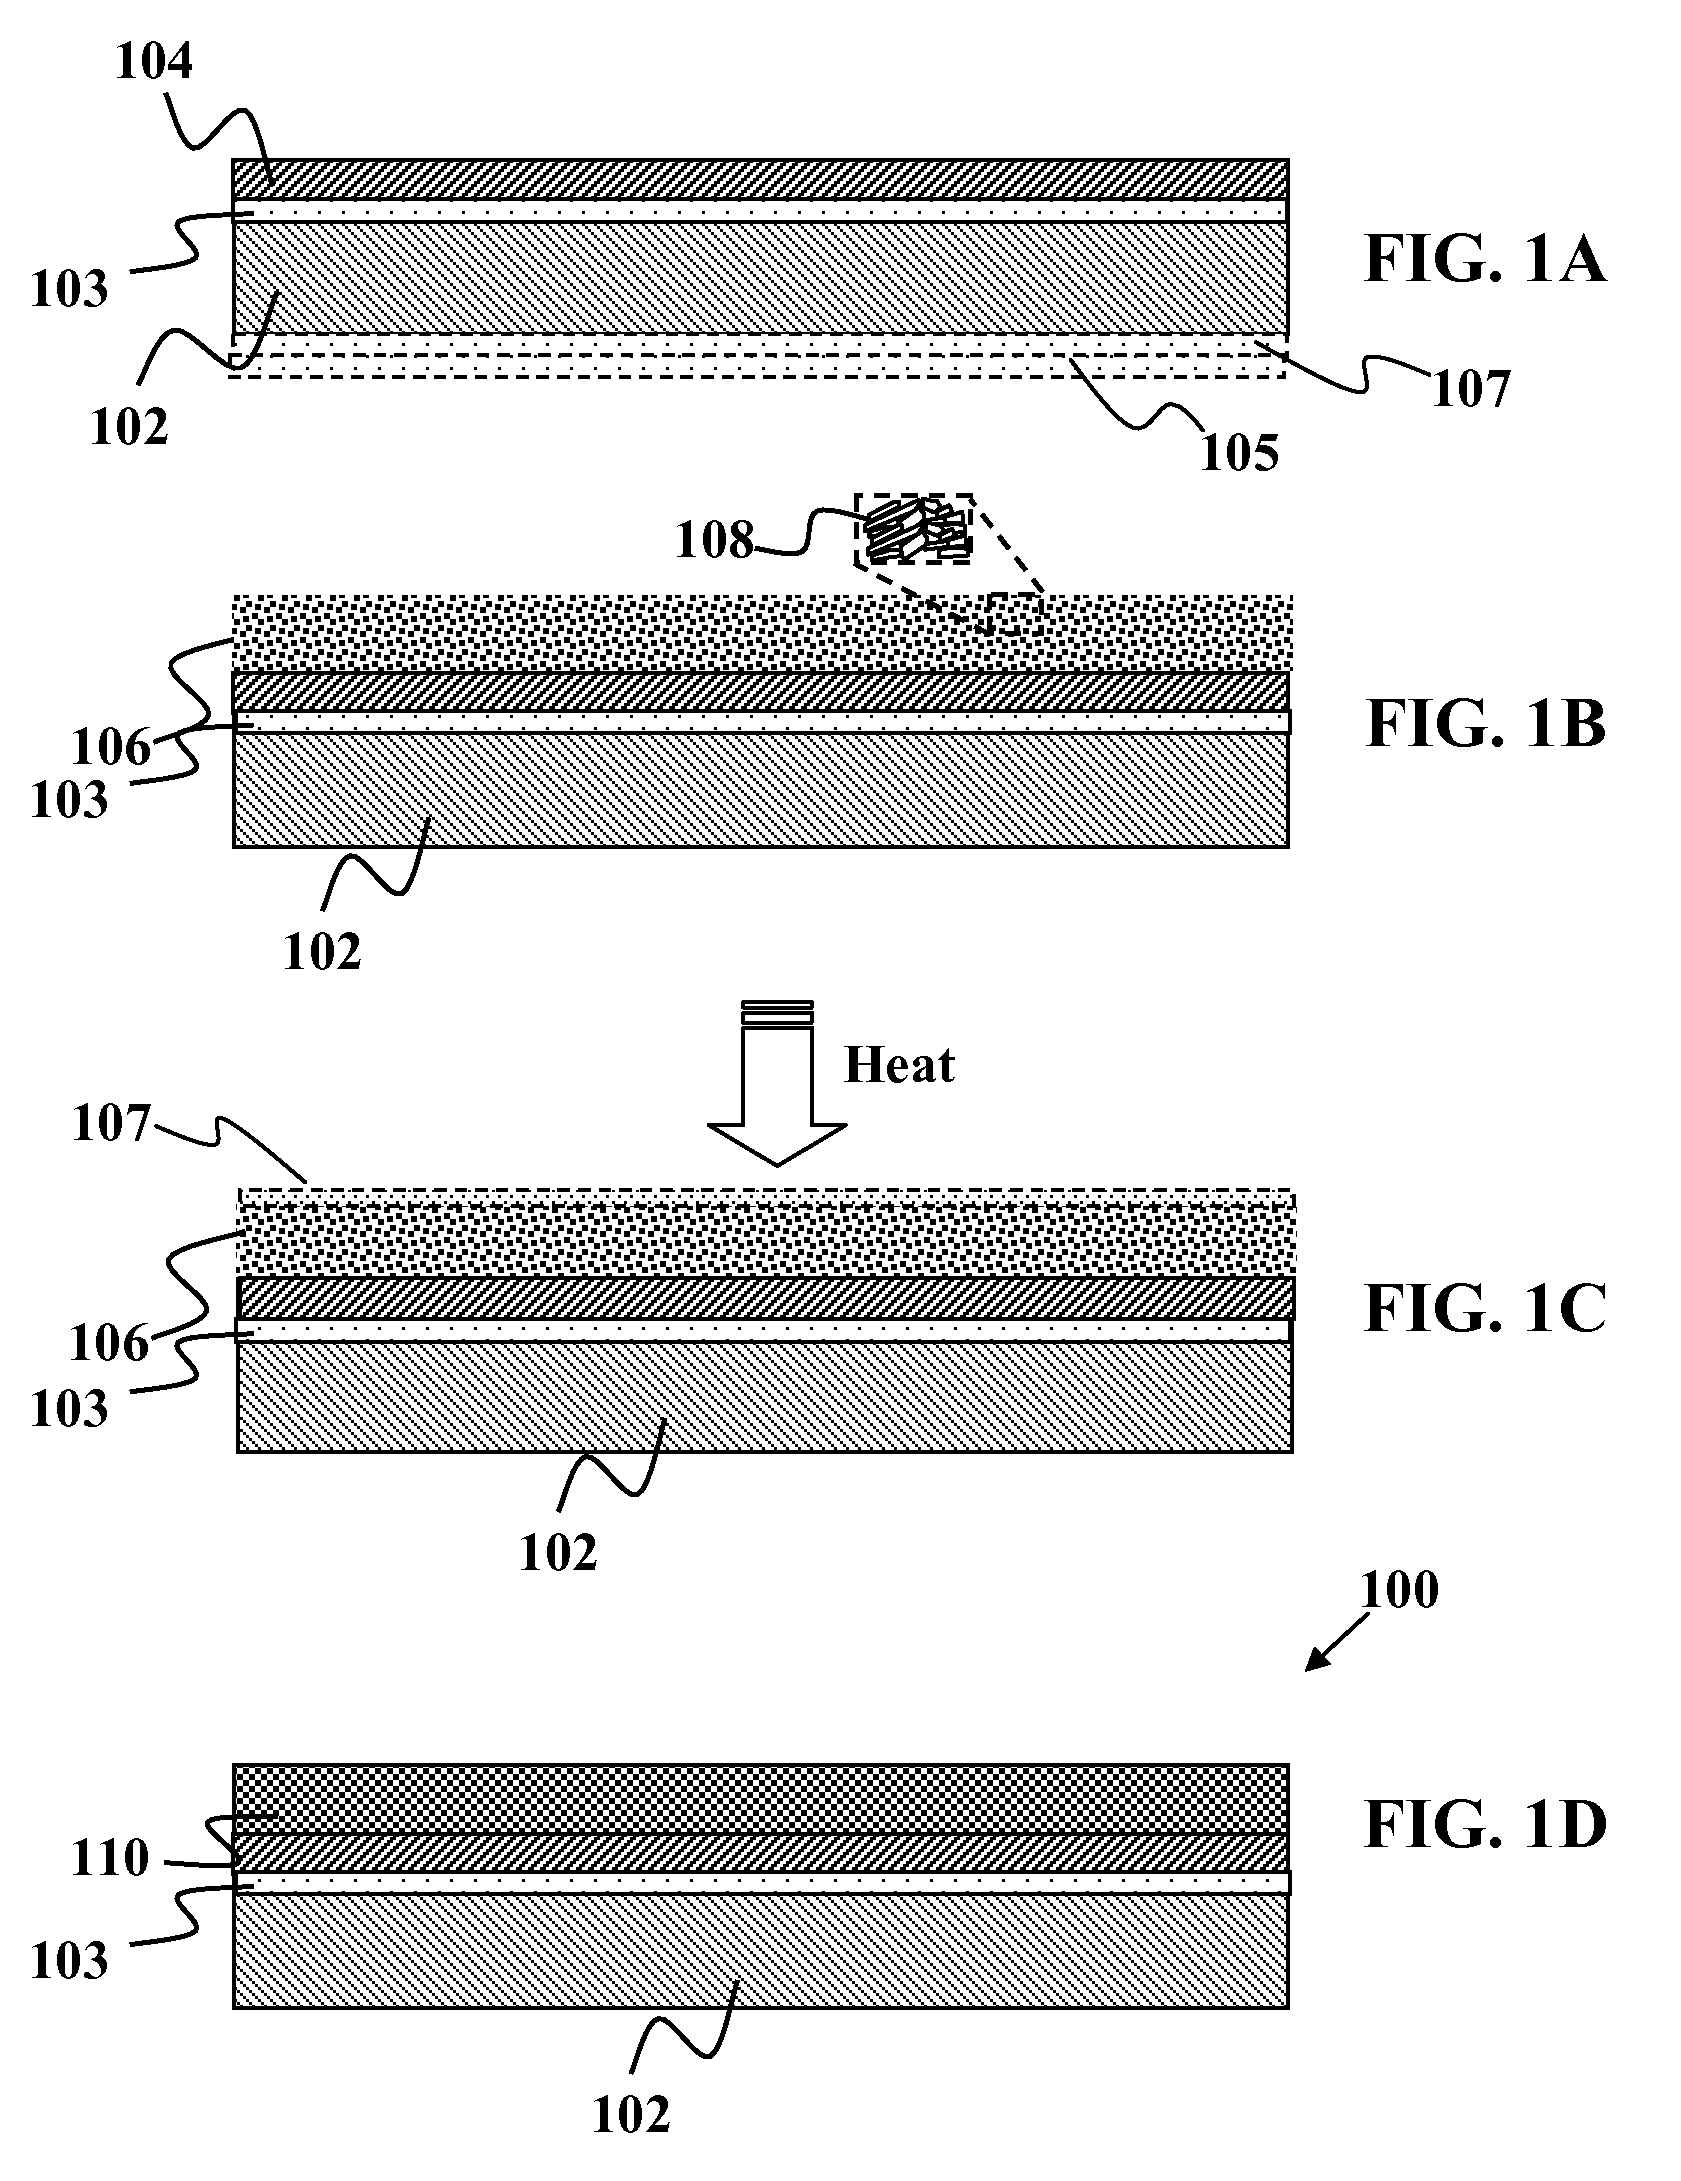 Solid group IIIA particles formed via quenching